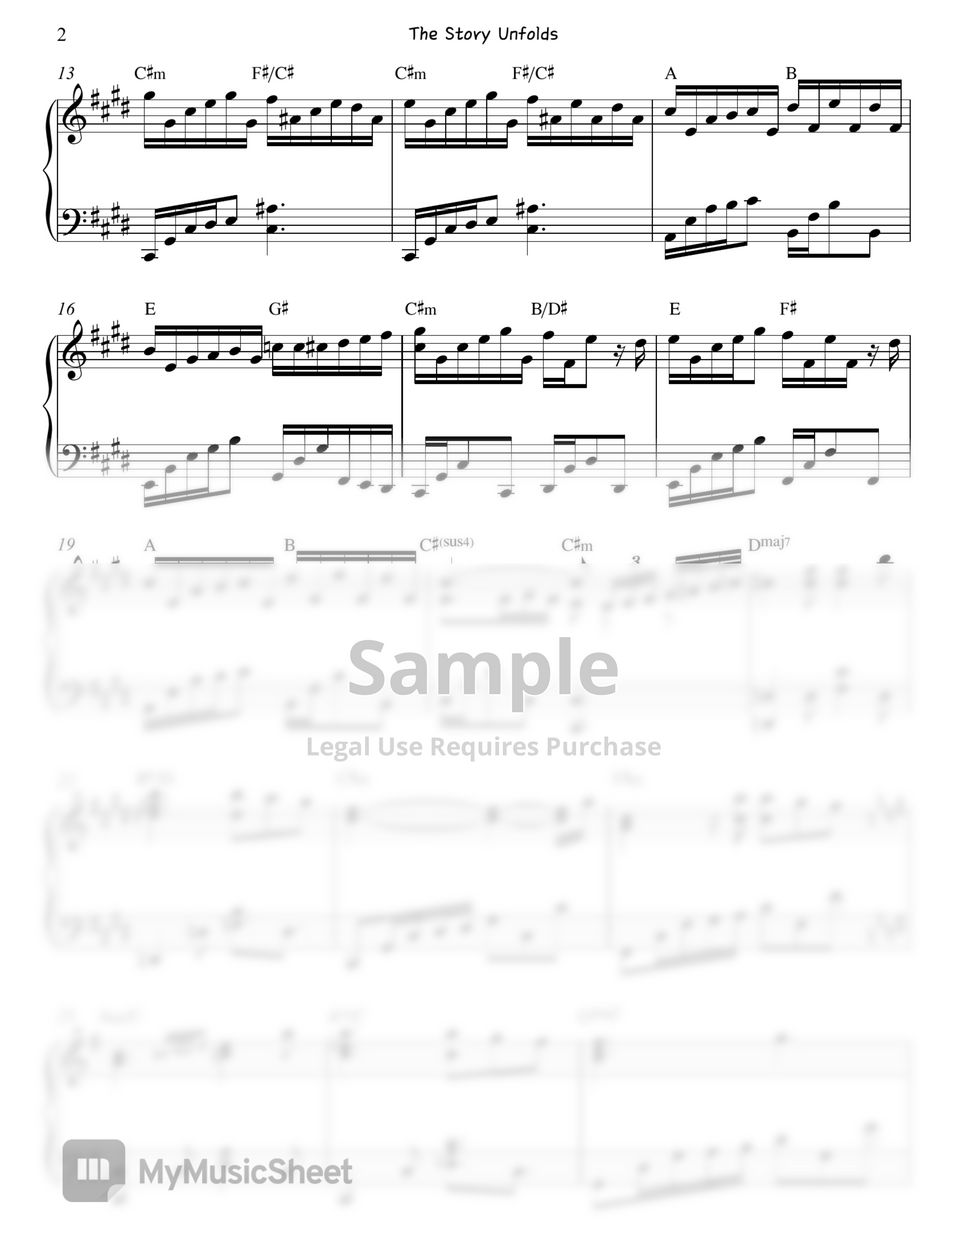 Sdorica : Sunset - The Story Unfolds  Piano Sheet by. Gloria L.